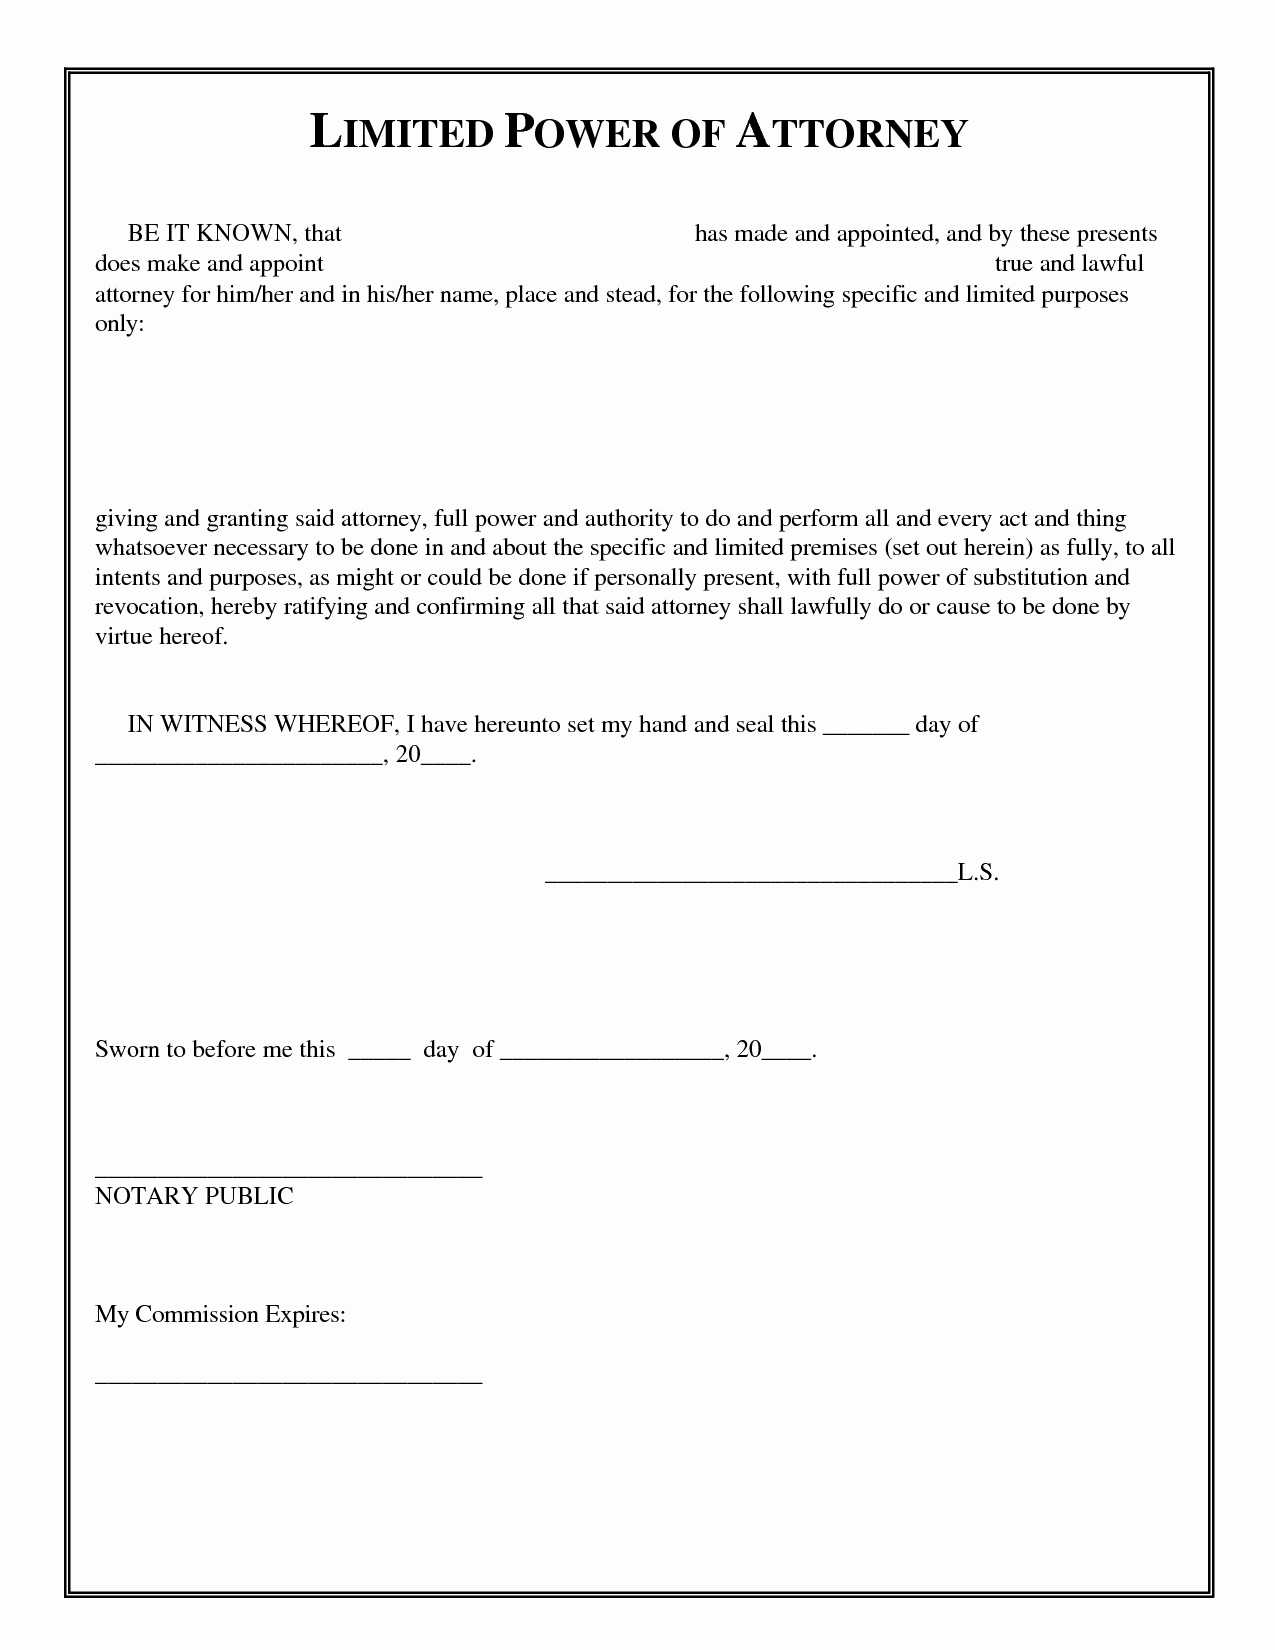 Electricity Worksheet Pdf Also Power attorney form Utah Pdf Beautiful Limited Power attorney